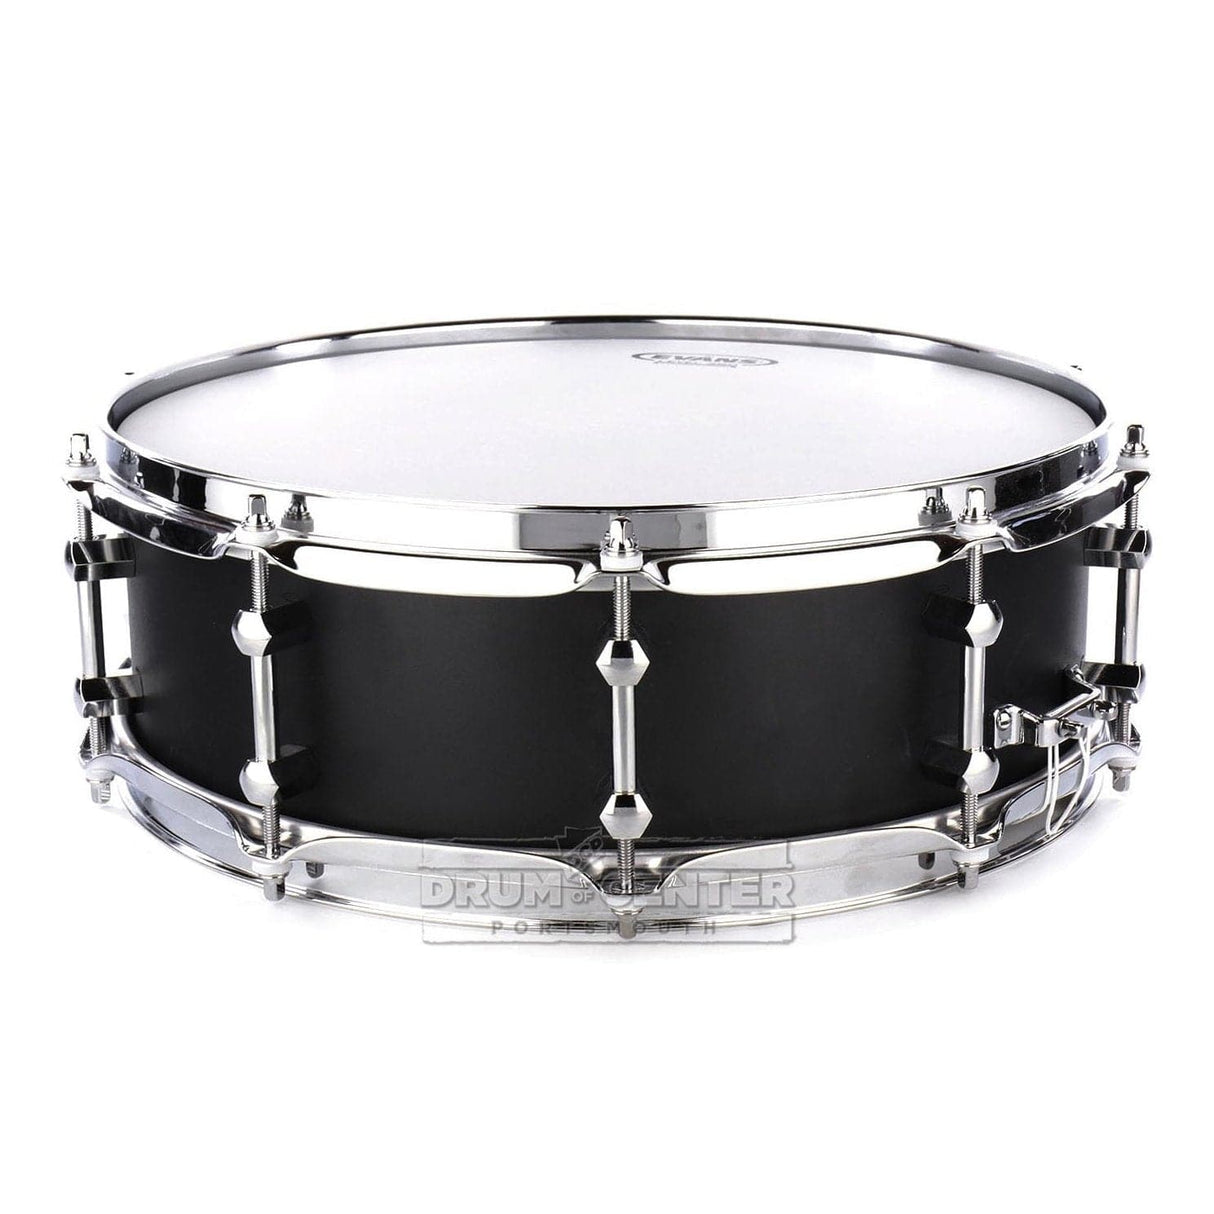 Noble & Cooley Alloy Classic Snare Drum 14x4.75 Black w/Chrome Hardware